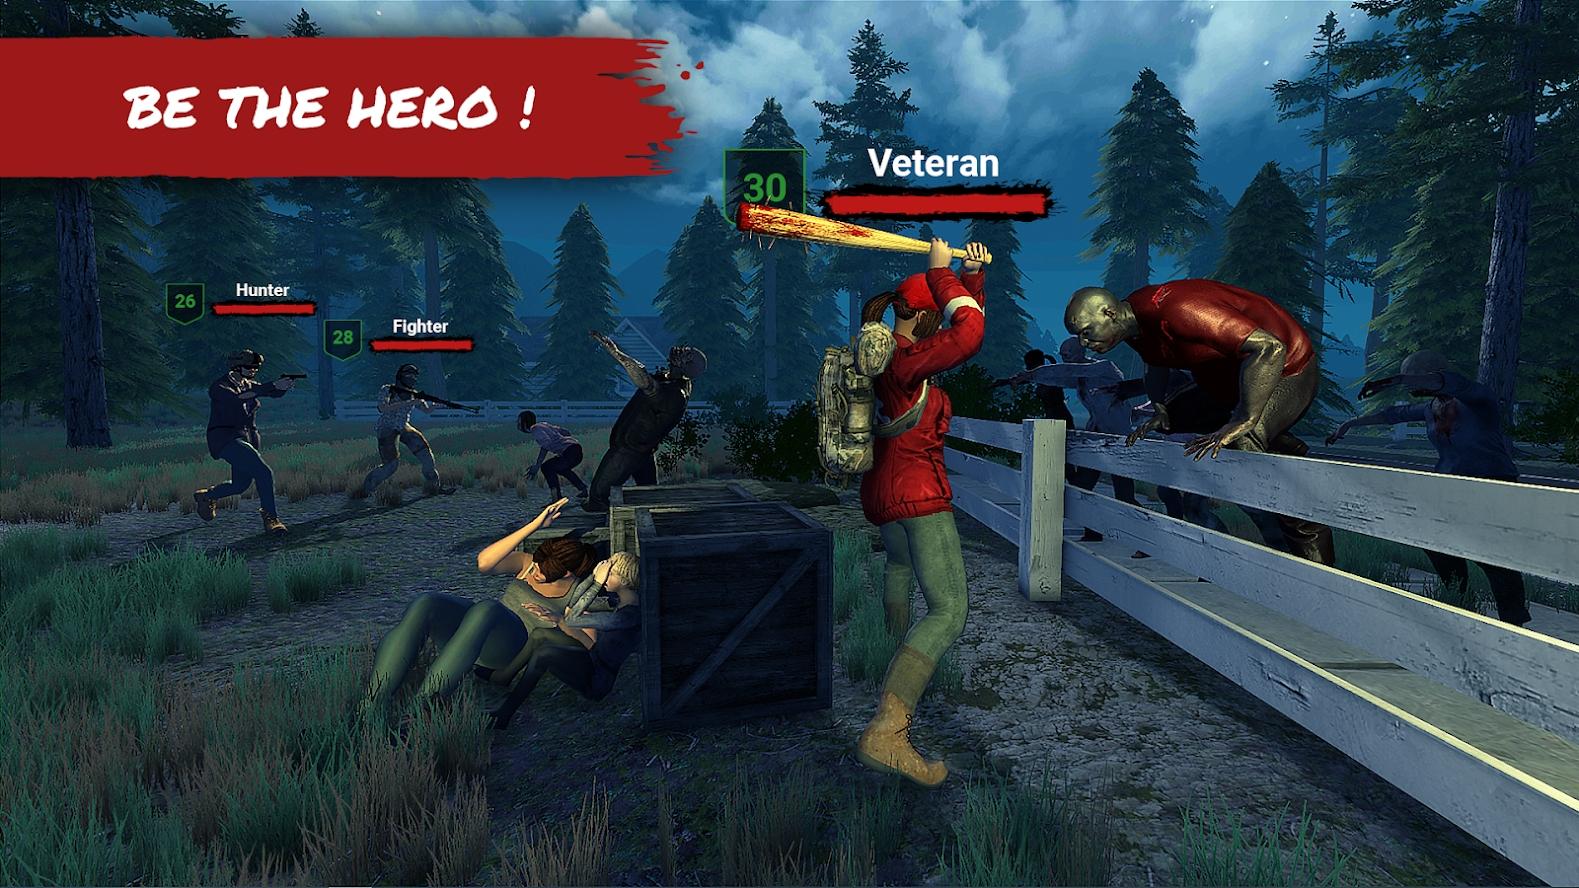 Игра дикие зомби. Horror Forest 3: mmo RPG Zombie Survival.